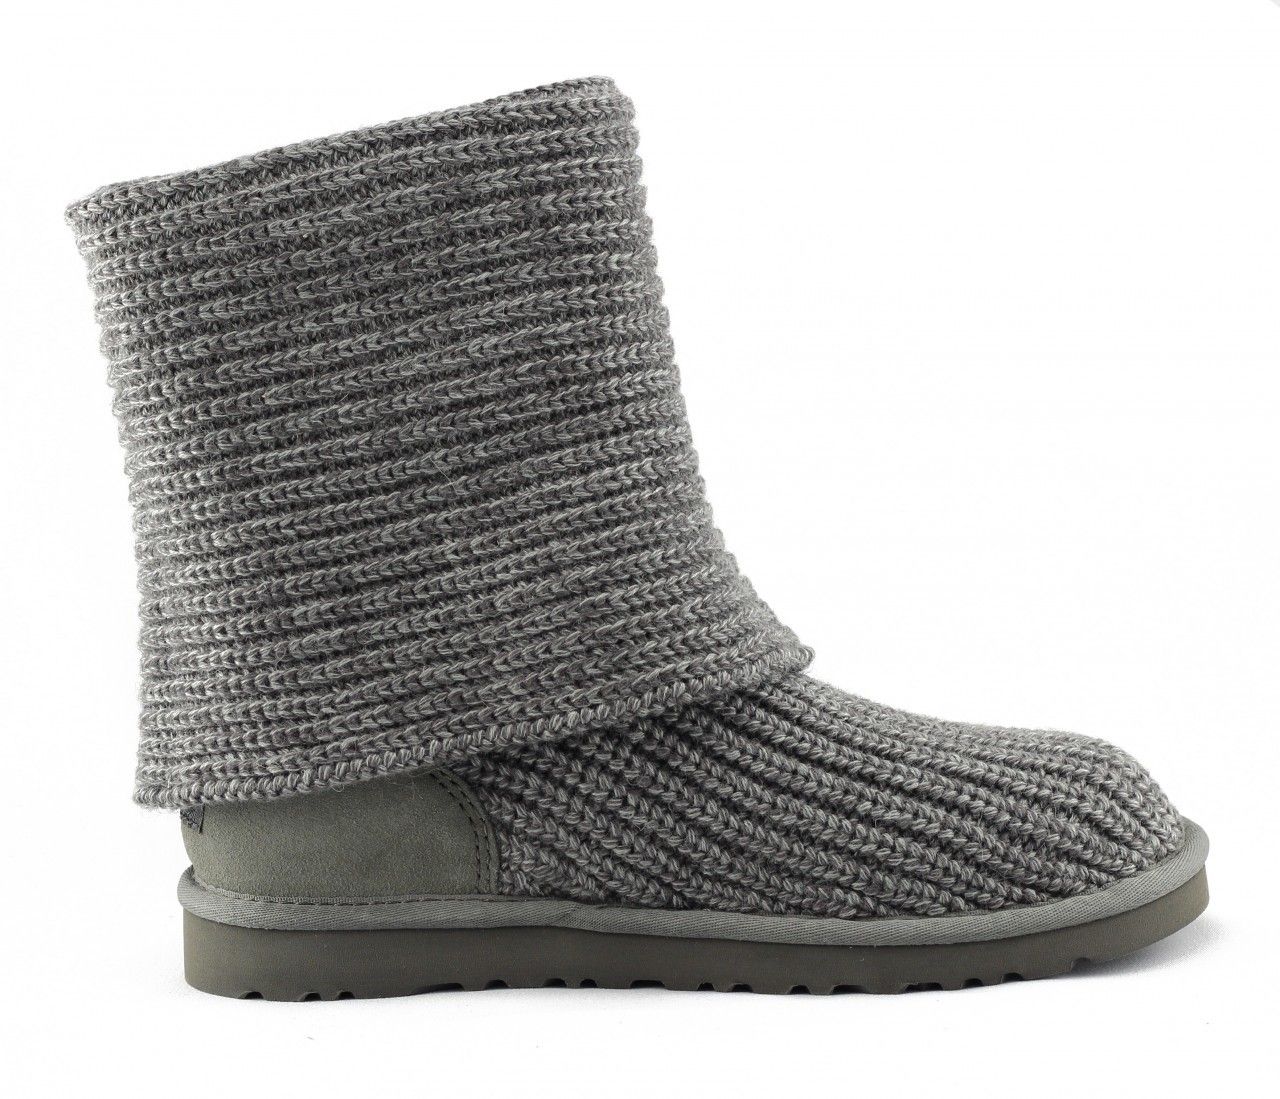 UGG Australia for Women: Cardy Boots 5819 GRY - Shiekh